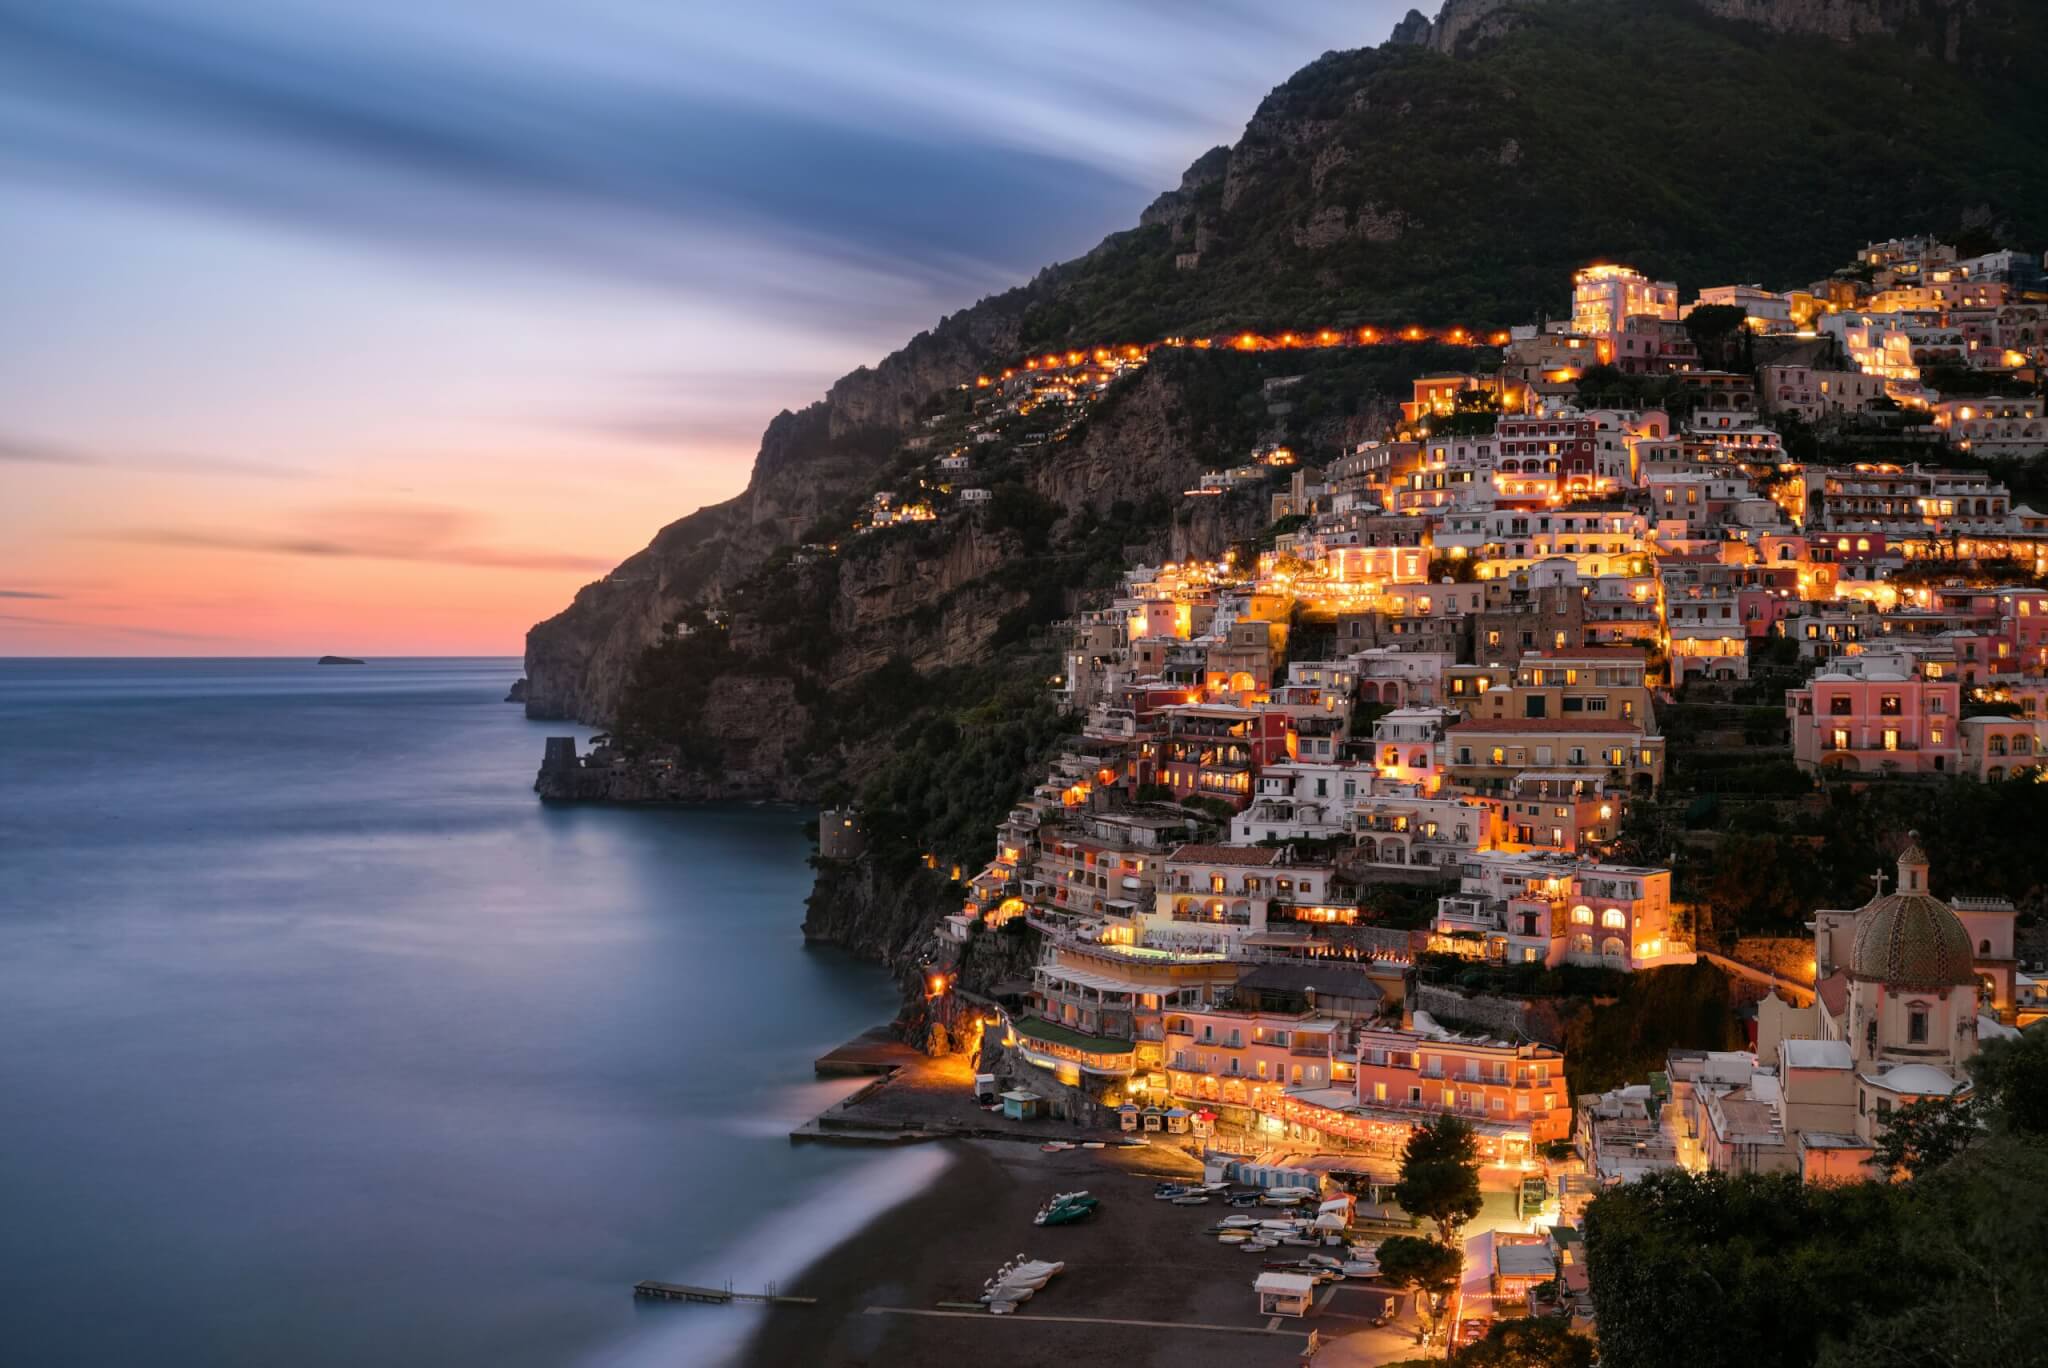 <p>While thoughts of the healing spray from the Mediterranean Sea still linger on your skin, you might want to return somewhere similar for your next milestone birthday – the Amalfi Coast. </p> <p>Imagine what a few nights in a luxury villa in Amalfi, Positano, or Ravello would do for your soul as you prepare to circle another year around the sun? Those rugged shorelines that are dotted with small beaches and pastel-colored fishing villages will live on in your mind forever. </p> <p>If your birthday happens to fall between May and September, these are some of the best months to visit because the crowds have dissipated, the rental options open up a little bit more, and you can commingle with the locals in a way you can't when peak season is in full bloom. </p>